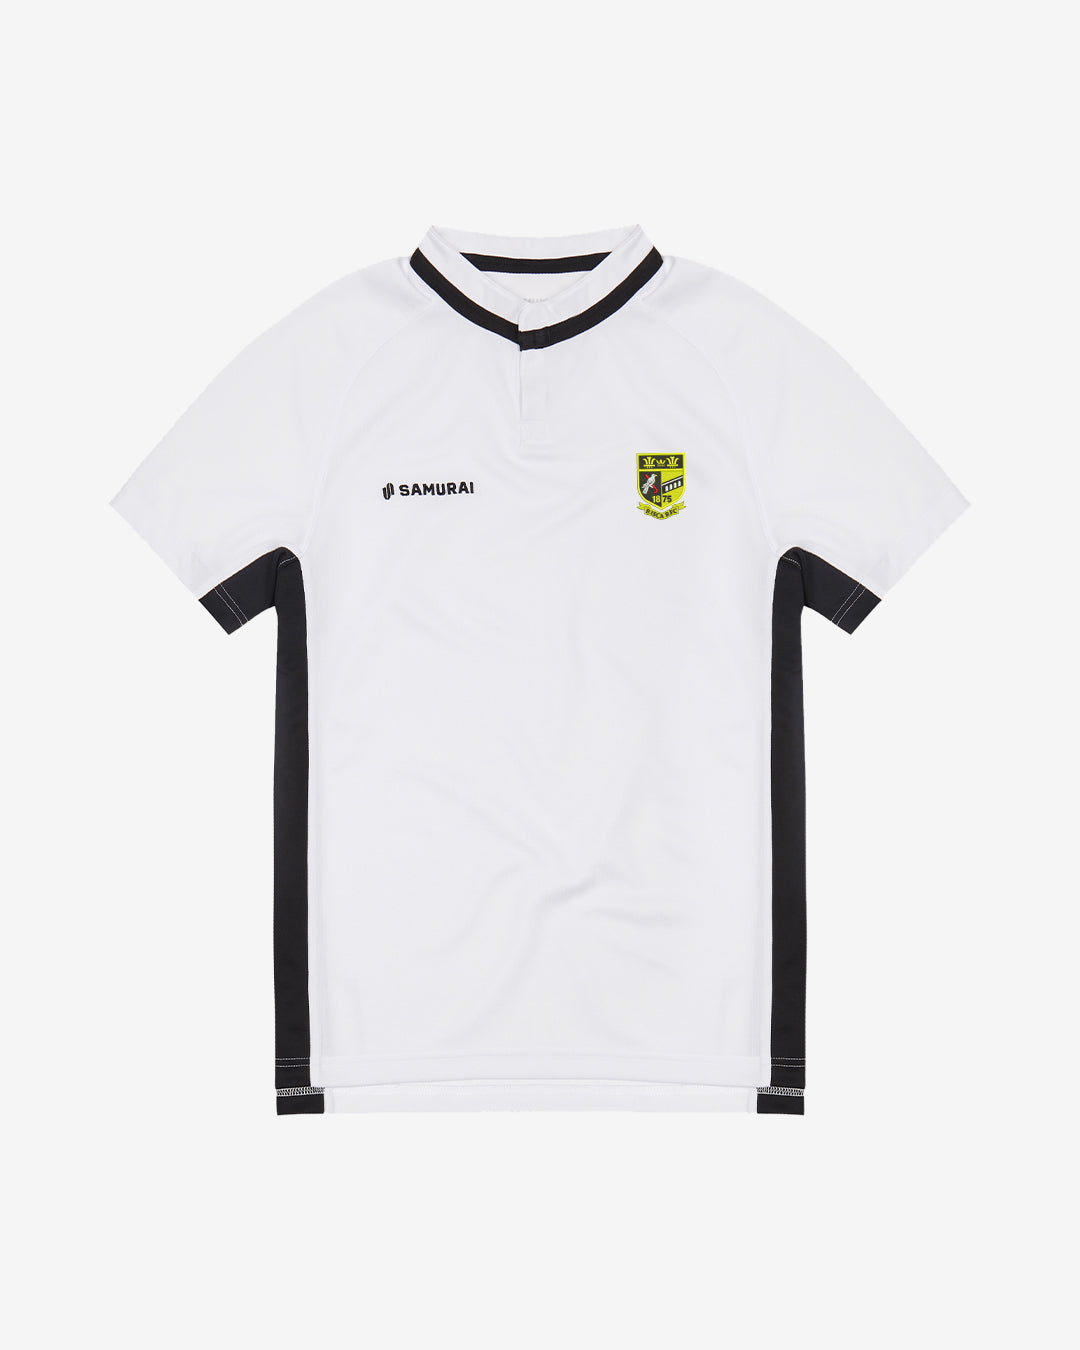 Risca RFC - EP:0109 - Rugby Training Jersey - White